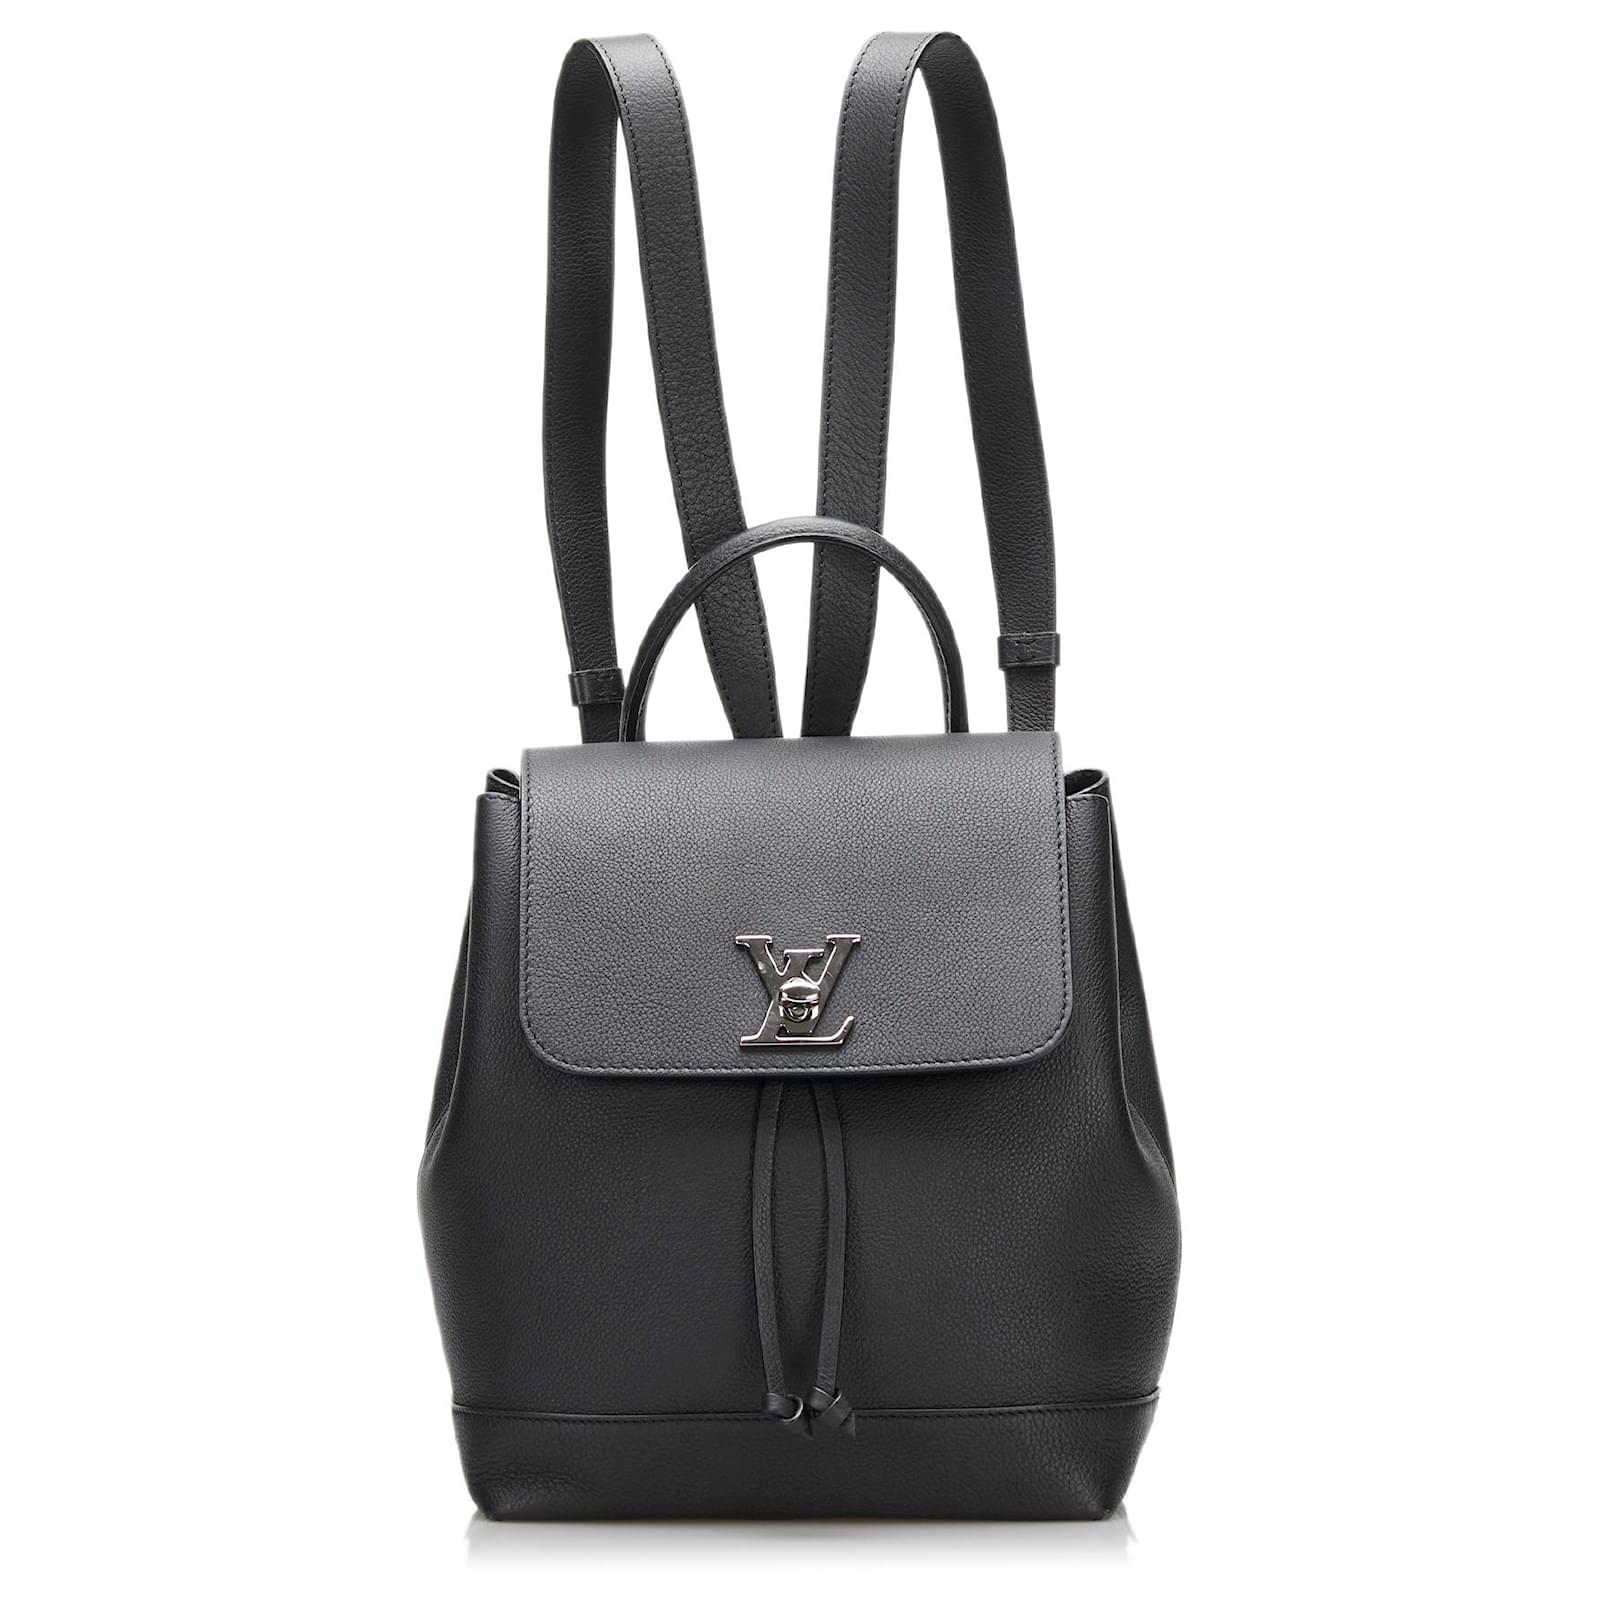 Louis Vuitton Lock Me Backpack Black Leather